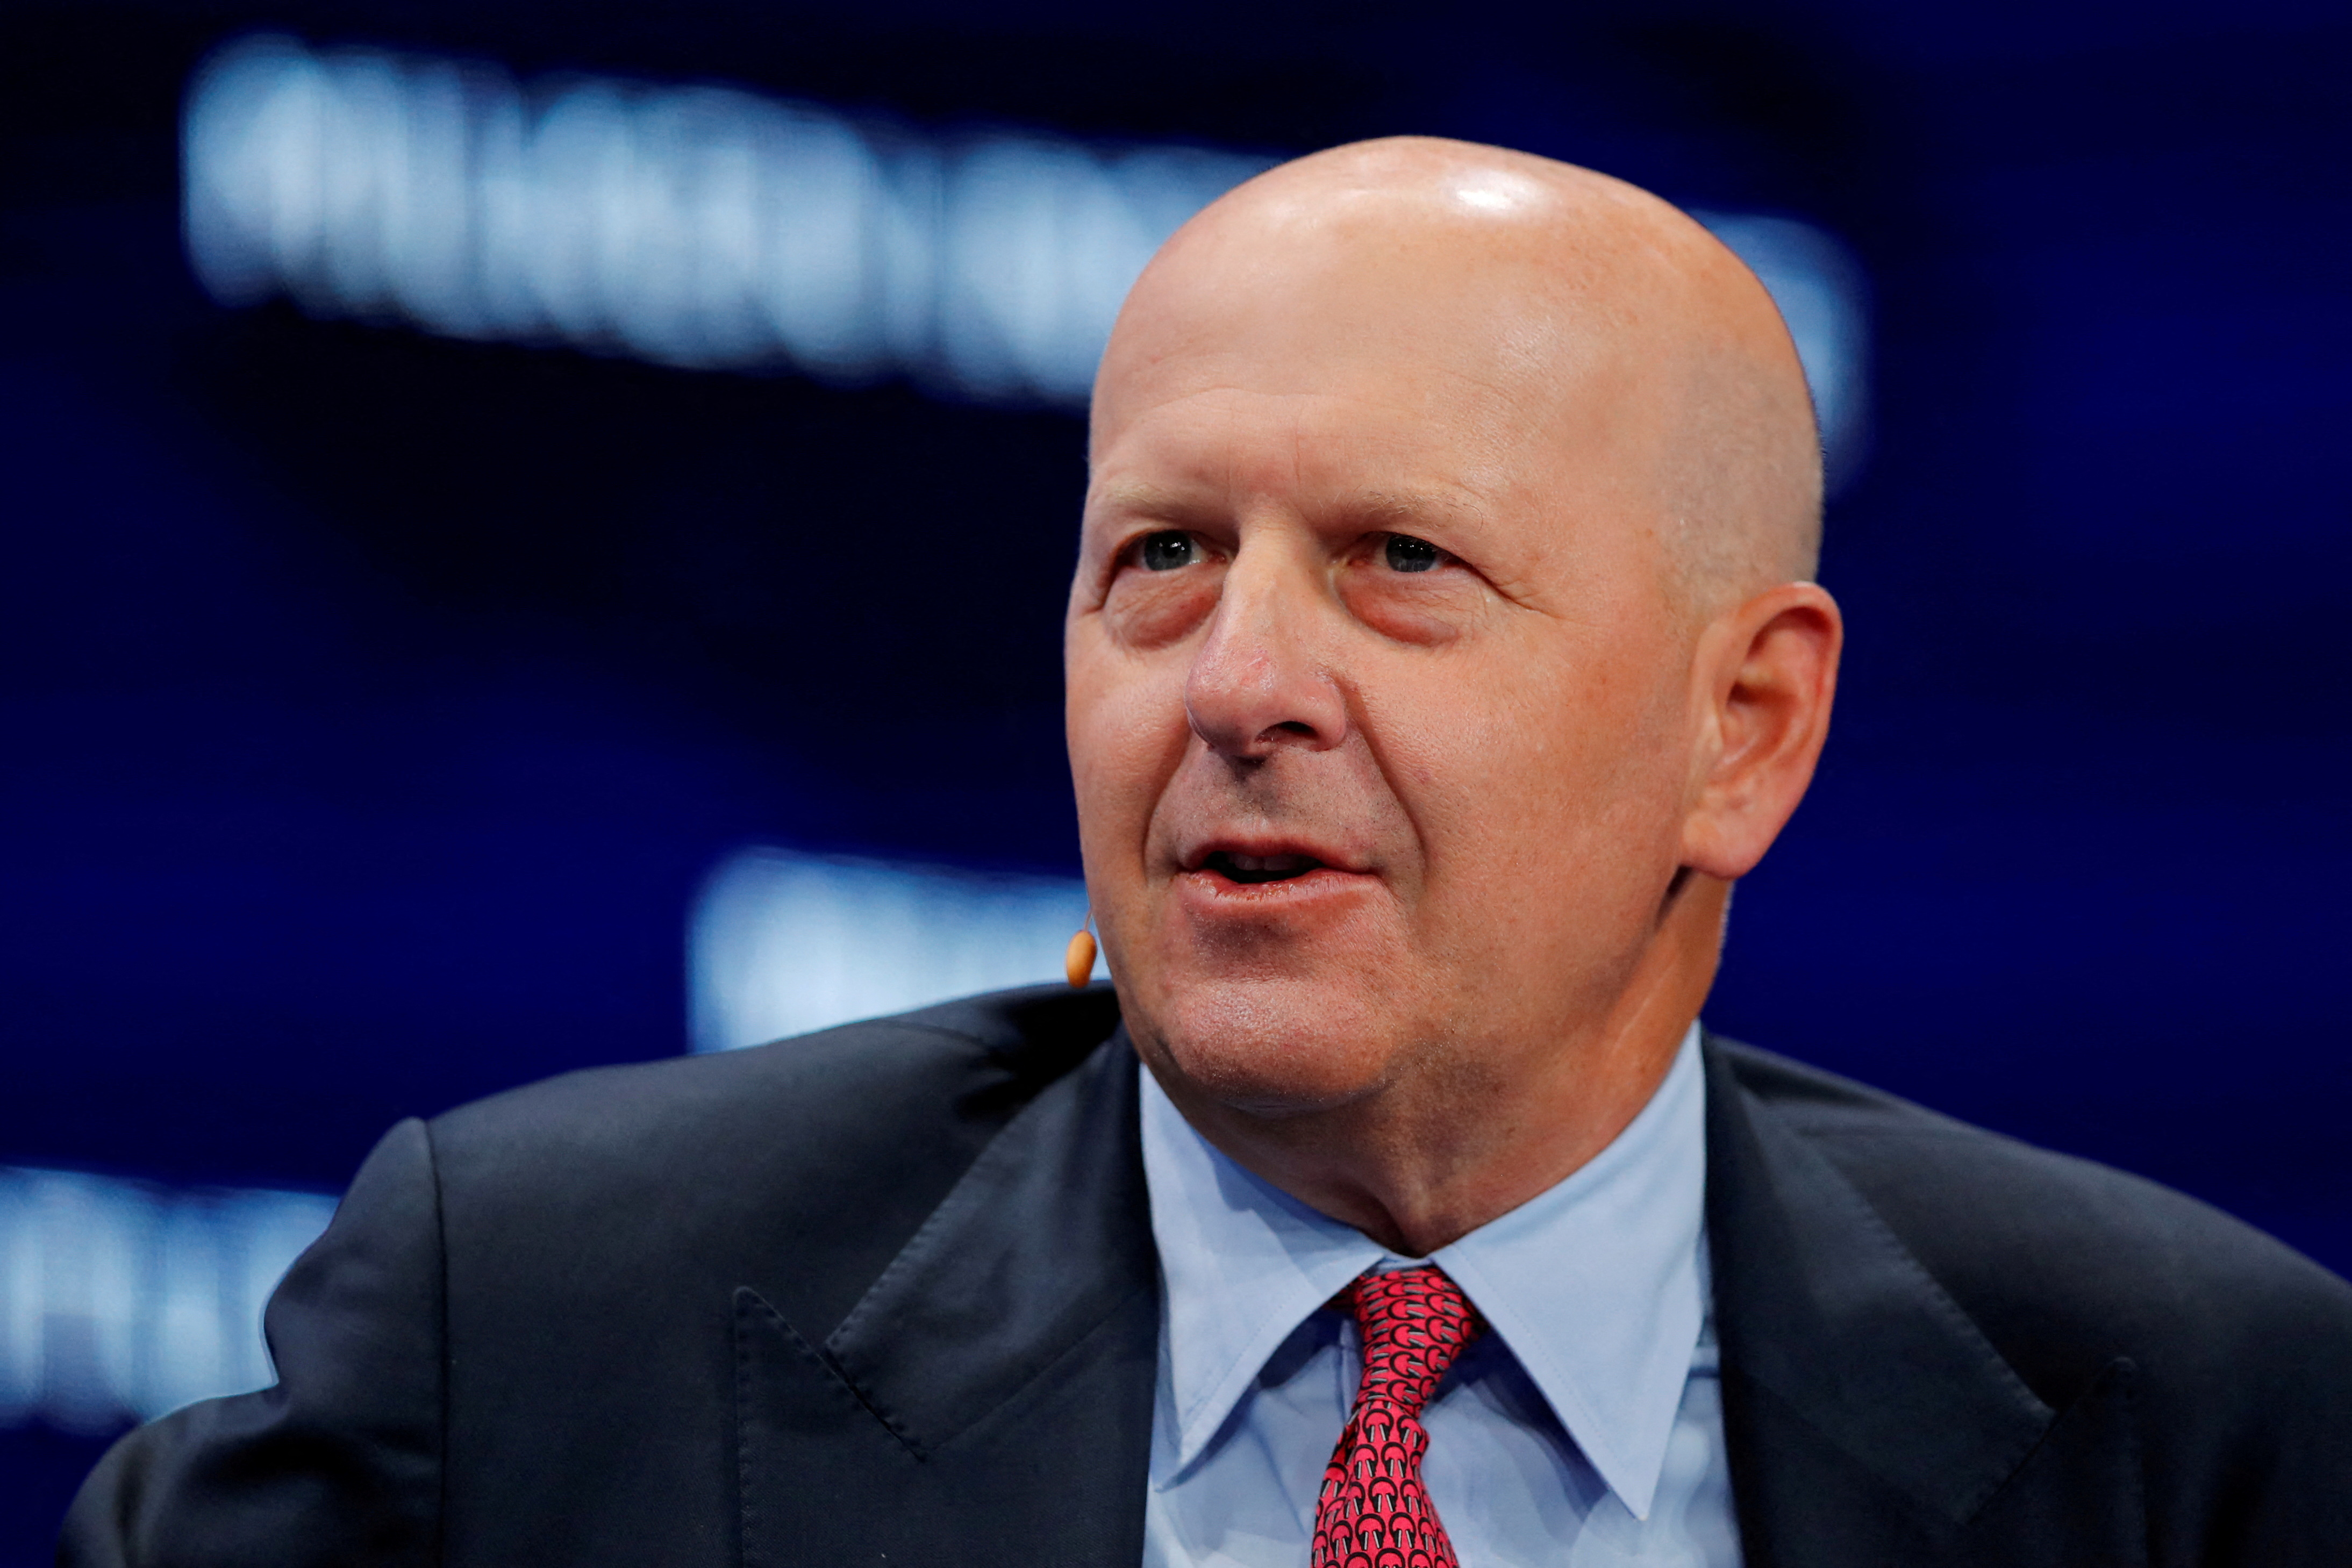 David M. Solomon, Chairman and CEO of Goldman Sachs, speaks during the Milken Institute's 22nd annual Global Conference in Beverly Hills